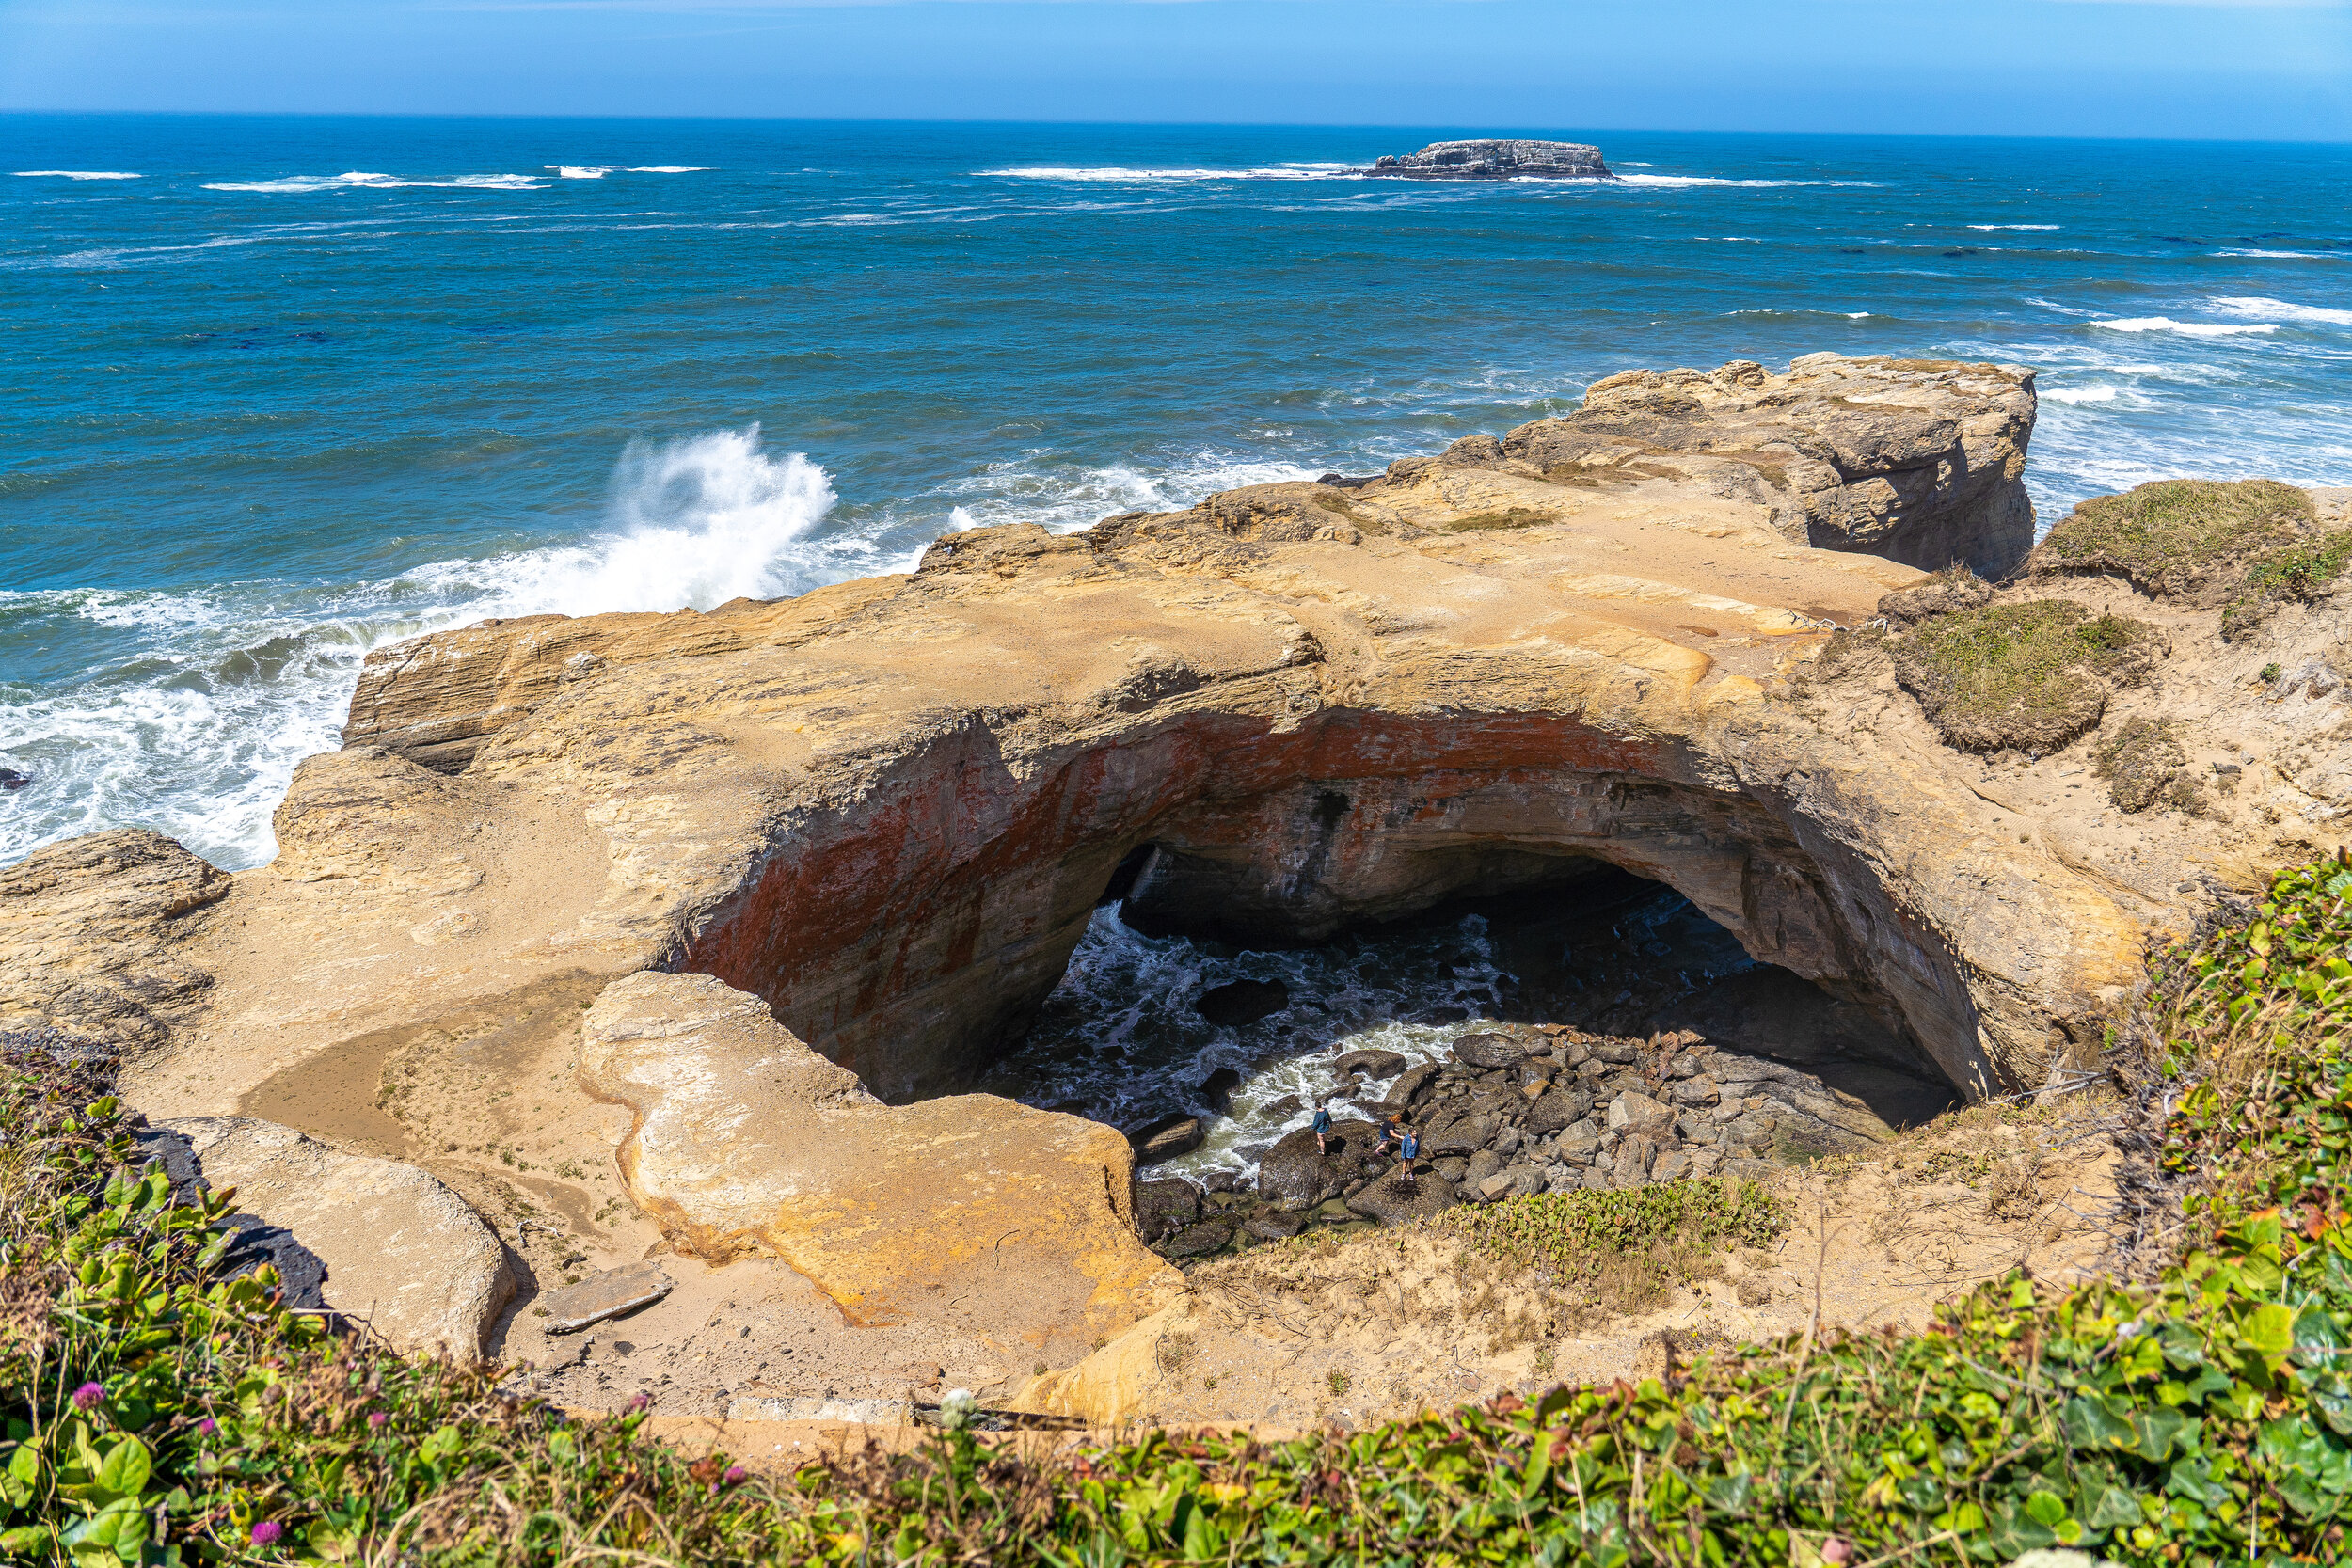   Devil’s Punchbowl State Natural Area &nbsp;in  Otter Rock  got its name from the swirling churn of the sea as wanves fill the rocky bowl like a witch’s brew. Waves enter the bowl through openings in the base and often violently churn, swirl, and fo